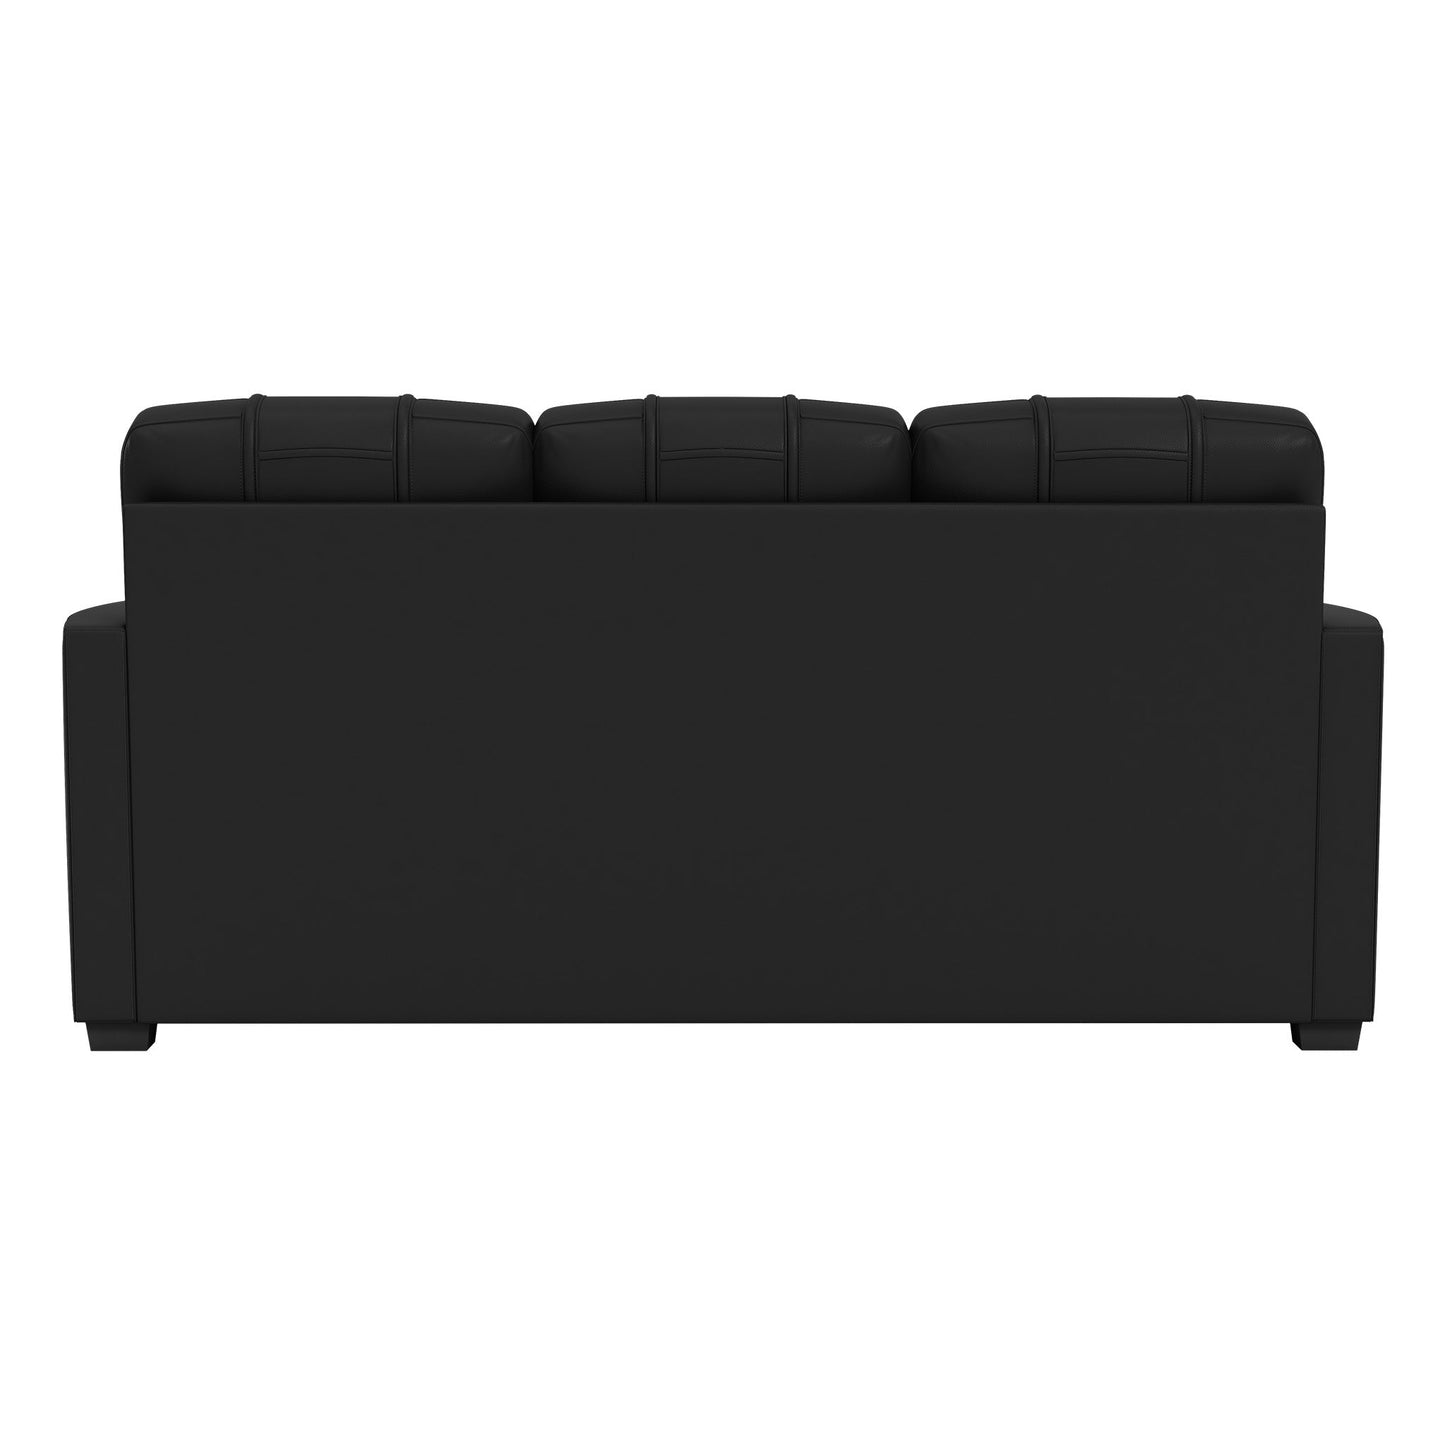 Stationary Sofa with American East Esports Conference Logo